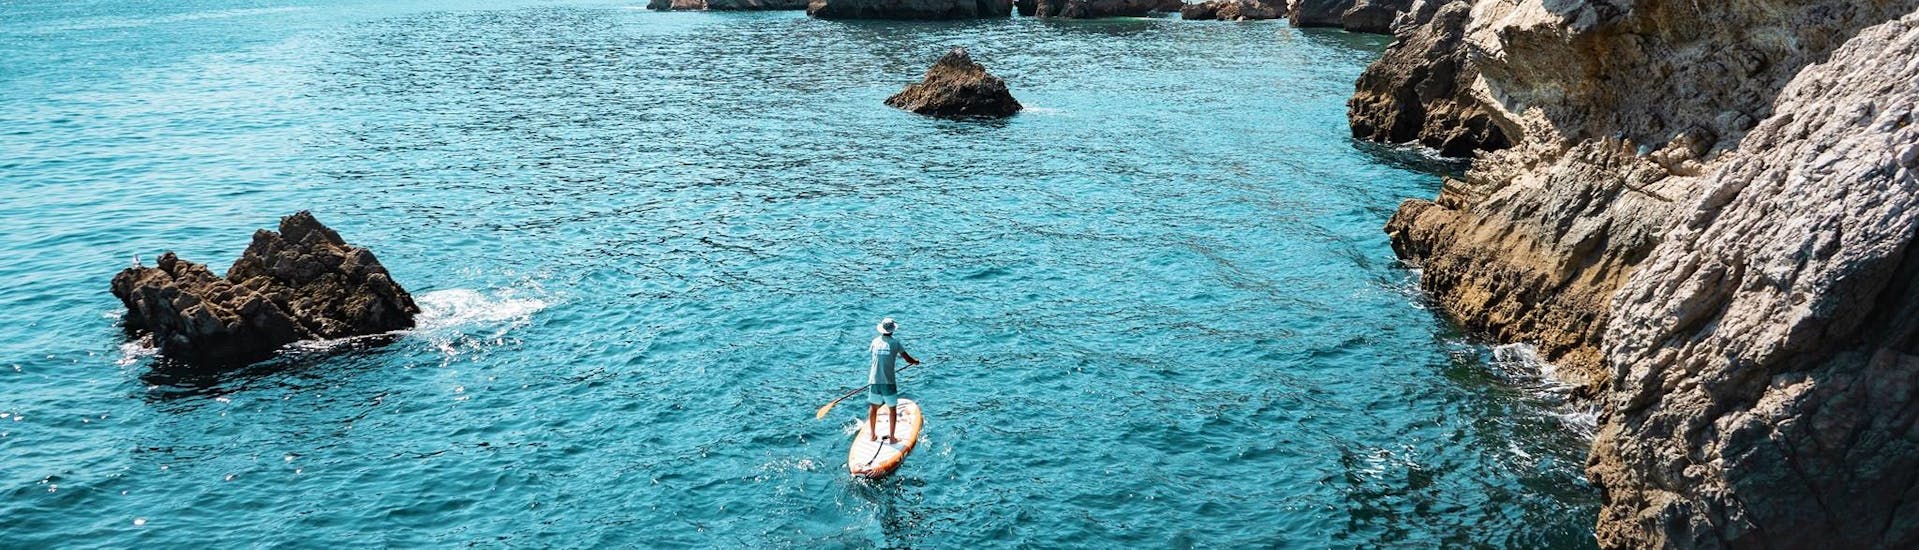 A participant of the Boat & SUP Safari in Arrábida Natural Park from Sesimbra organized by Meira Pro Center Sesimbra is exploring the stunning limestone coast on his SUP-Board.